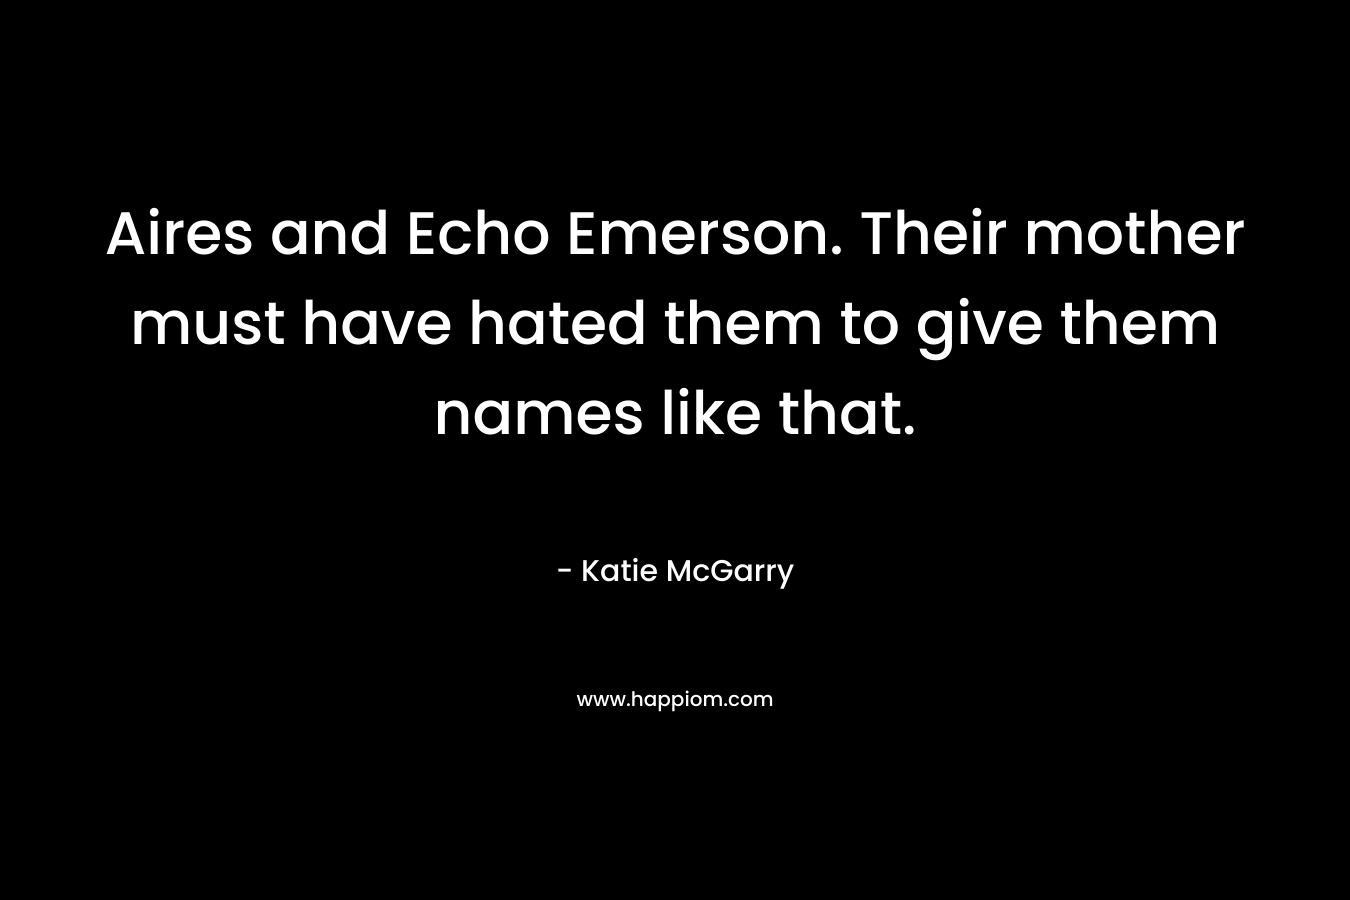 Aires and Echo Emerson. Their mother must have hated them to give them names like that. – Katie McGarry